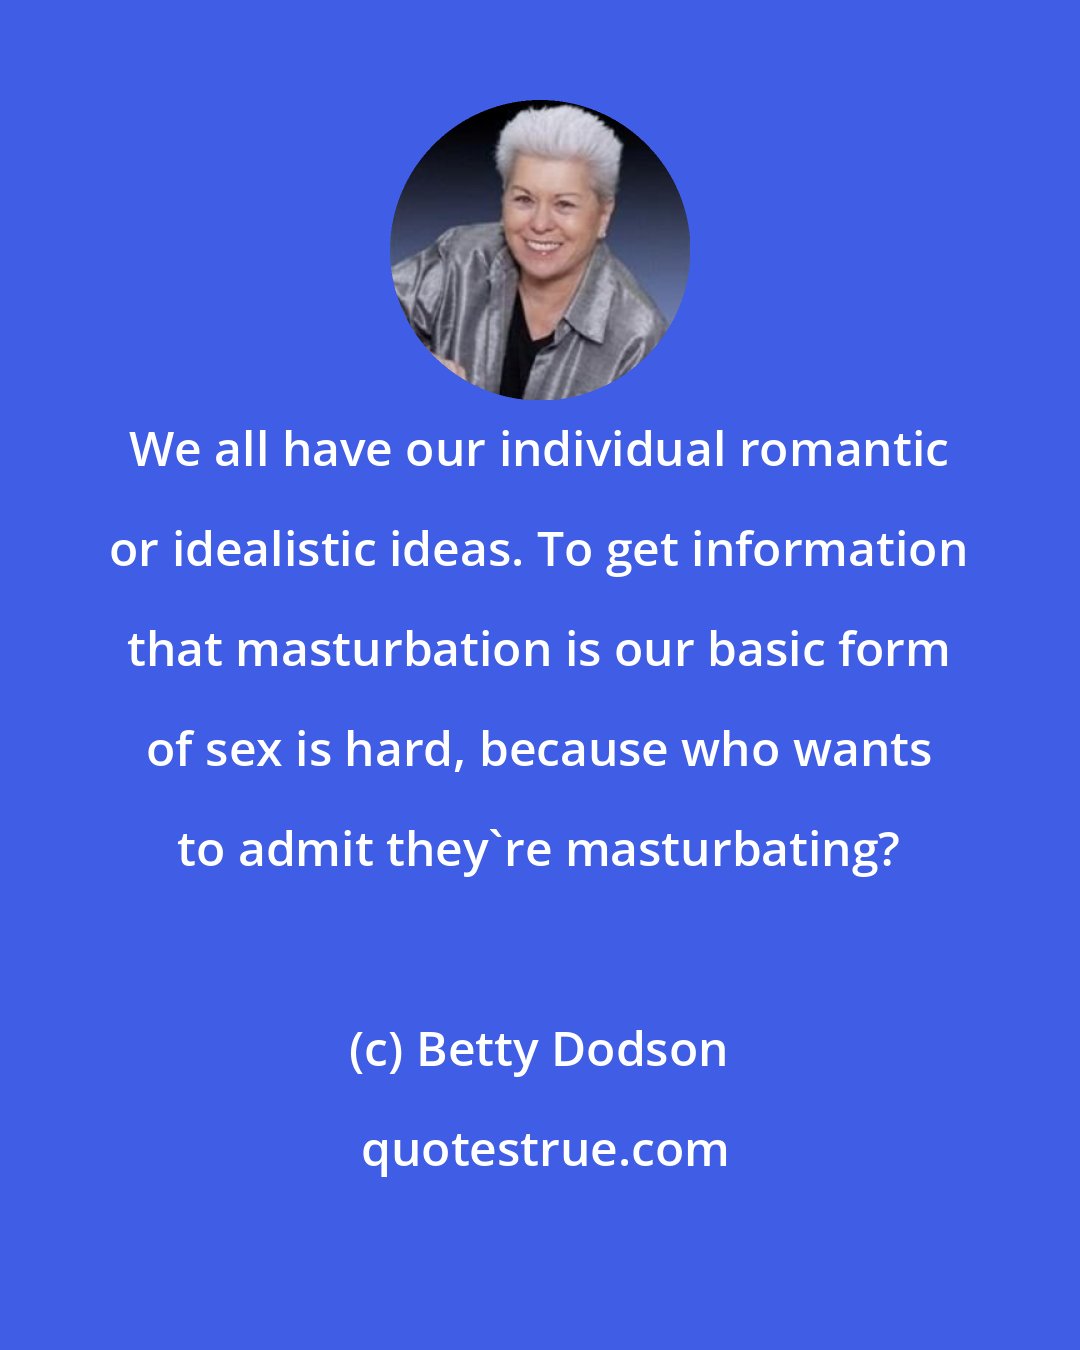 Betty Dodson: We all have our individual romantic or idealistic ideas. To get information that masturbation is our basic form of sex is hard, because who wants to admit they're masturbating?